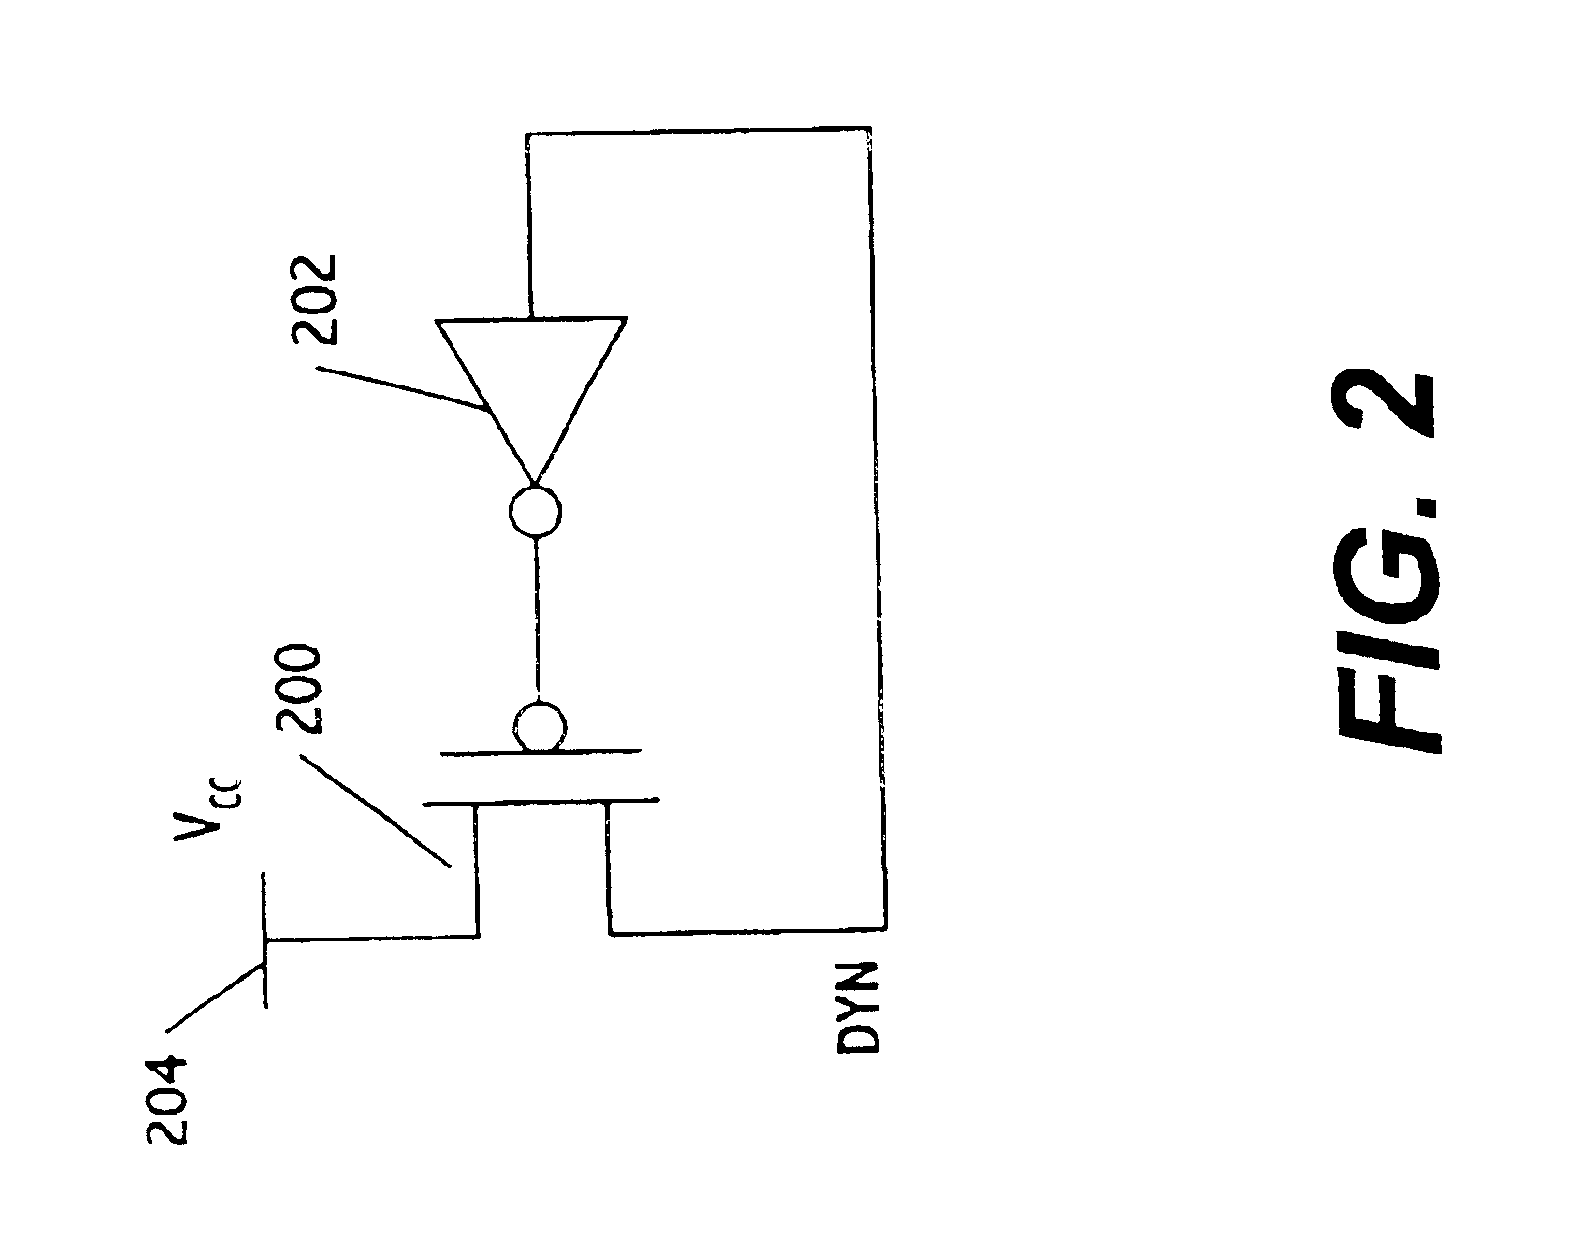 Current mirror based multi-channel leakage current monitor circuit and method